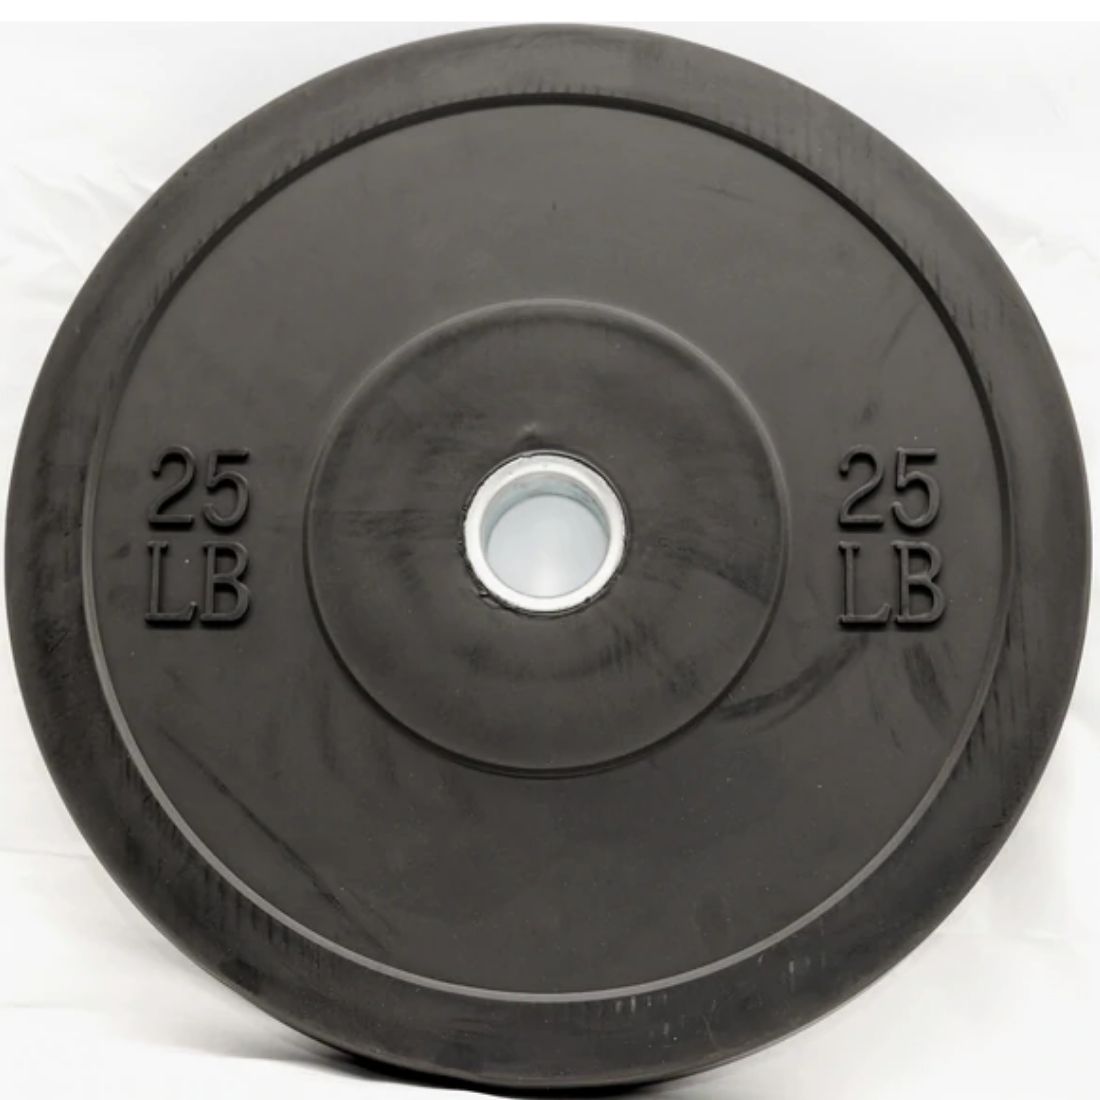 Fit It Out LBS Bumper Plate